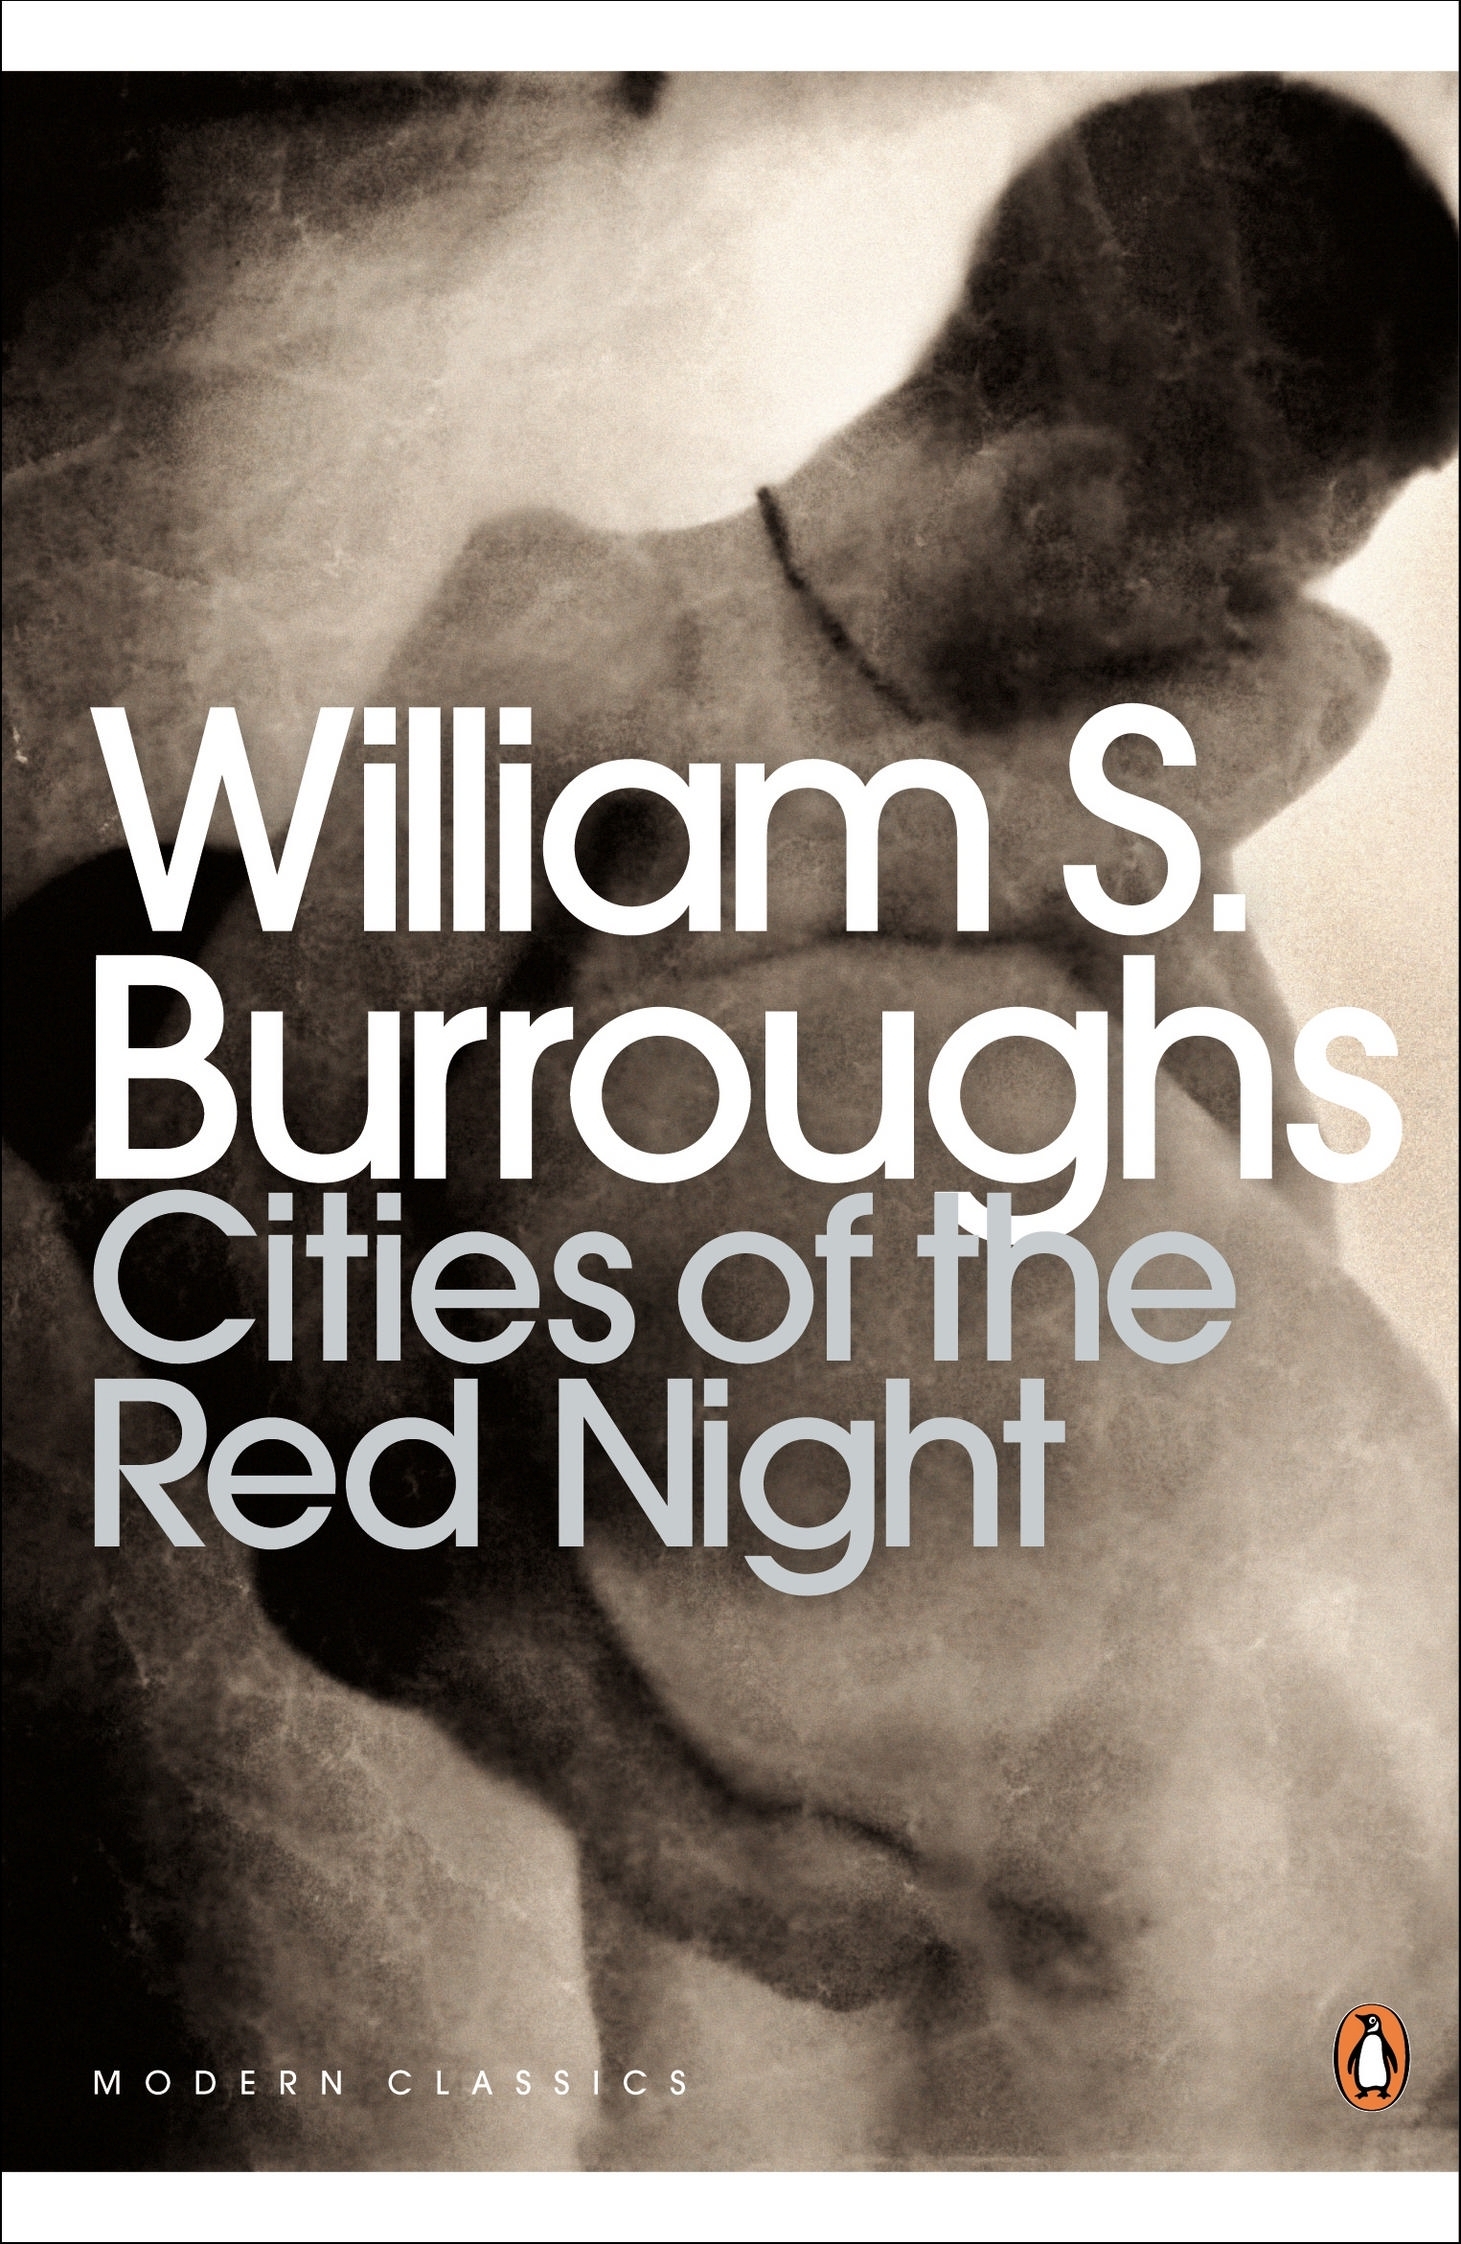 Cities of the Red Night by William S Burroughs Penguin Books Australia